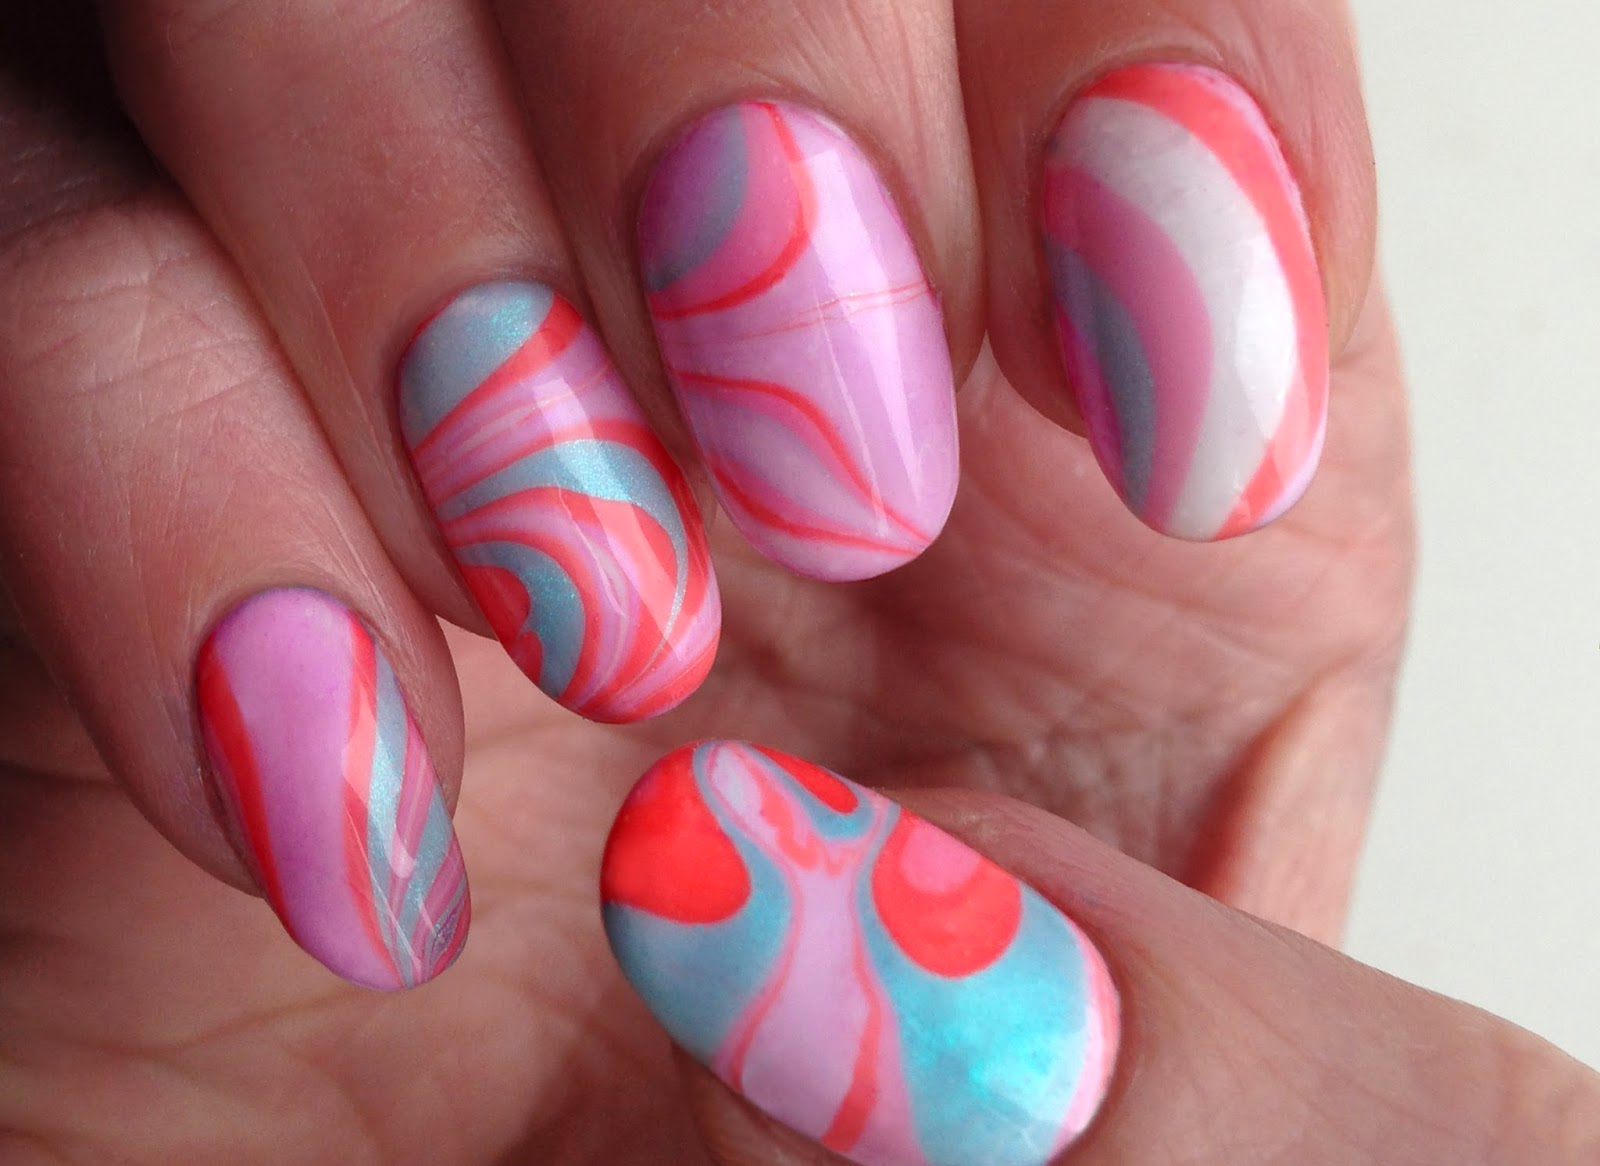 6. Striped Rainbow Water Marble Nail Art Designs to Try - wide 8